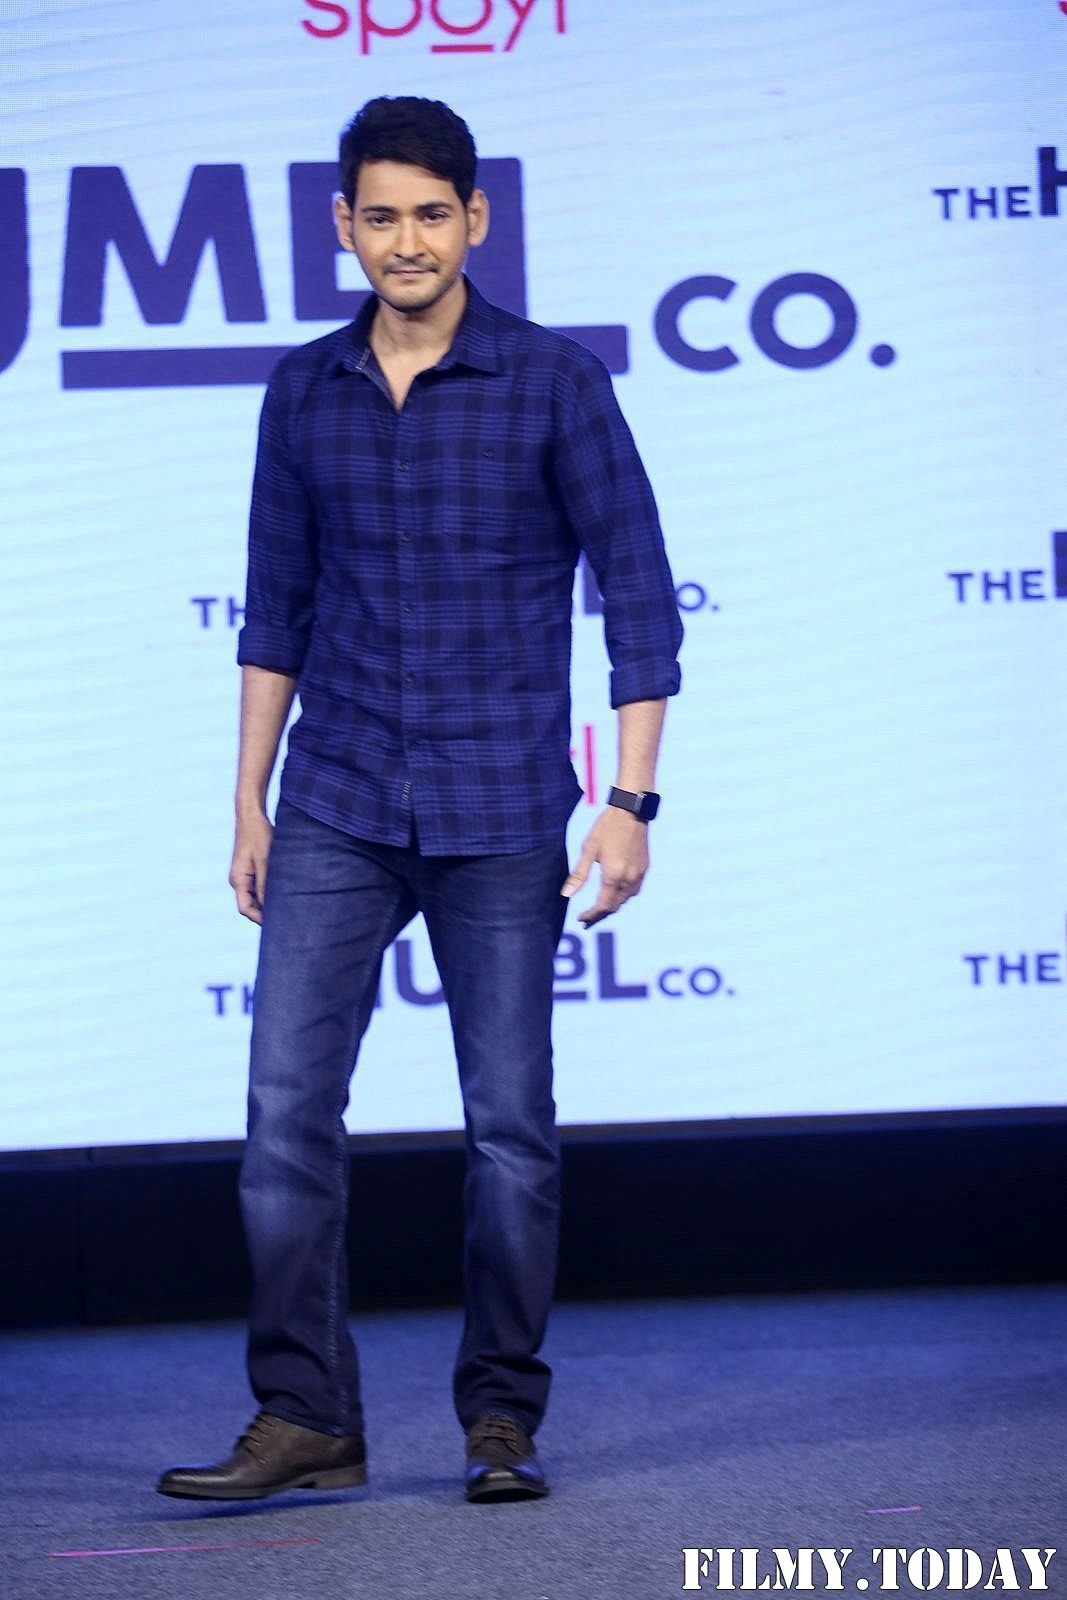 Mahesh Babu - The Humbl Co Clothing Brand Launch Photos | Picture 1673371